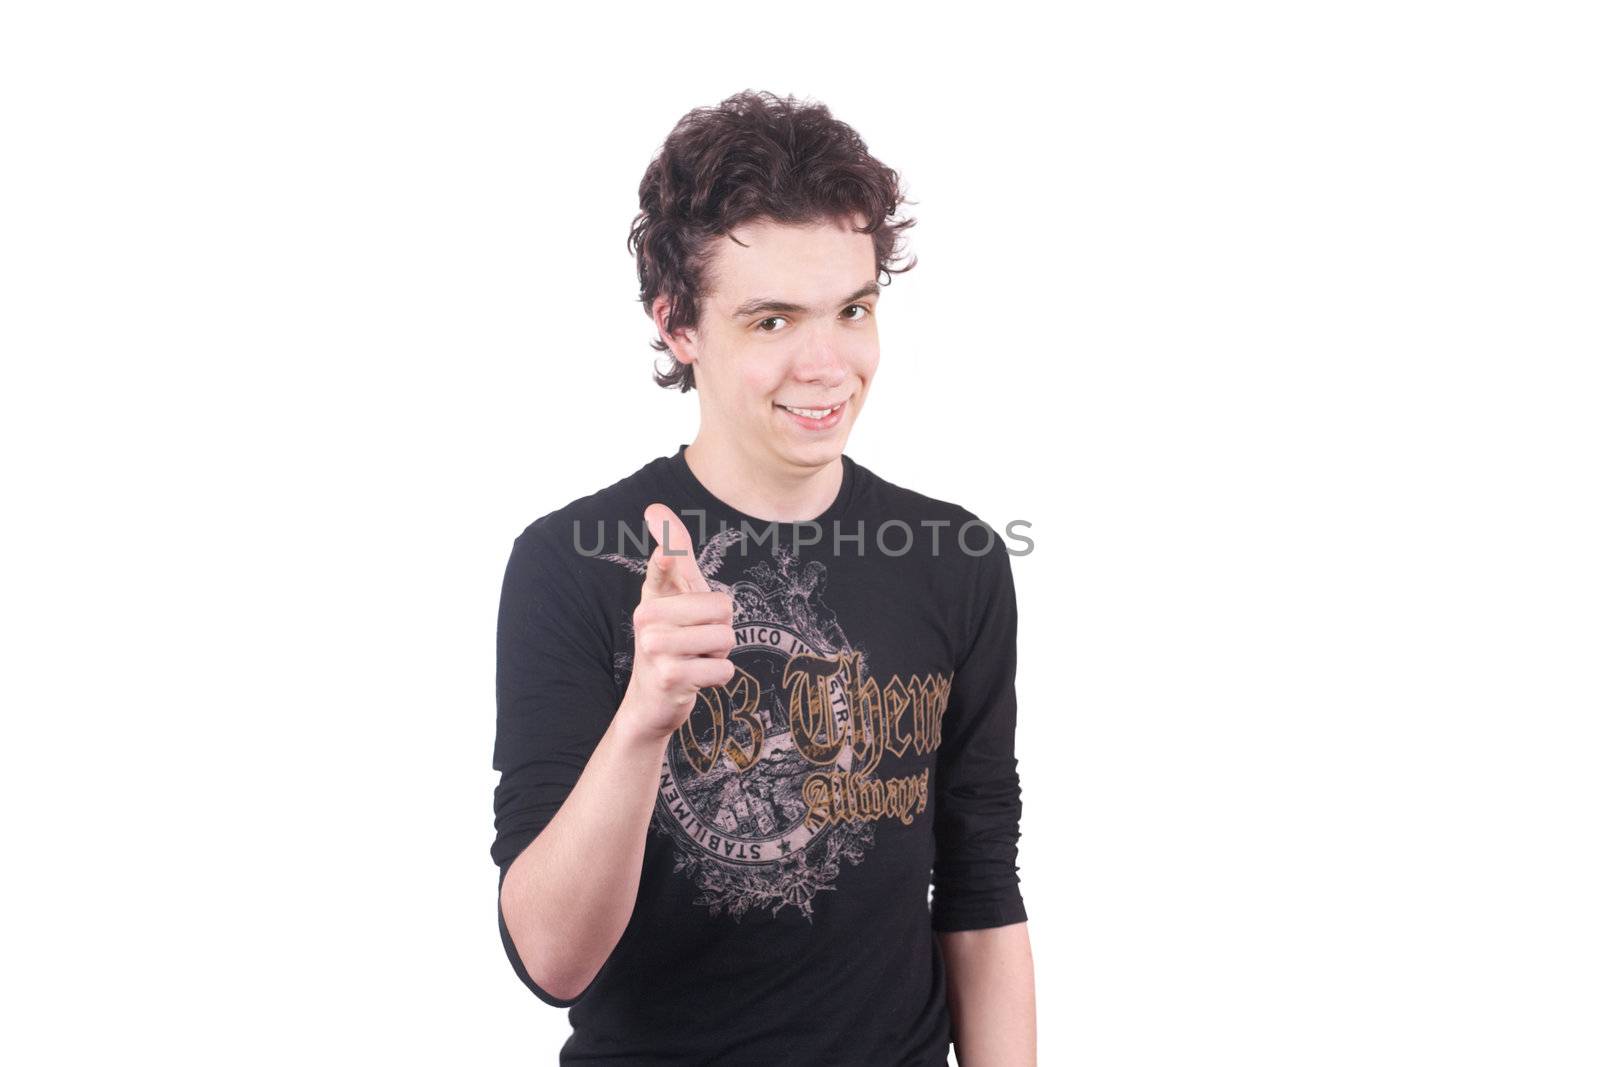 The boy shows by a finger on a white background